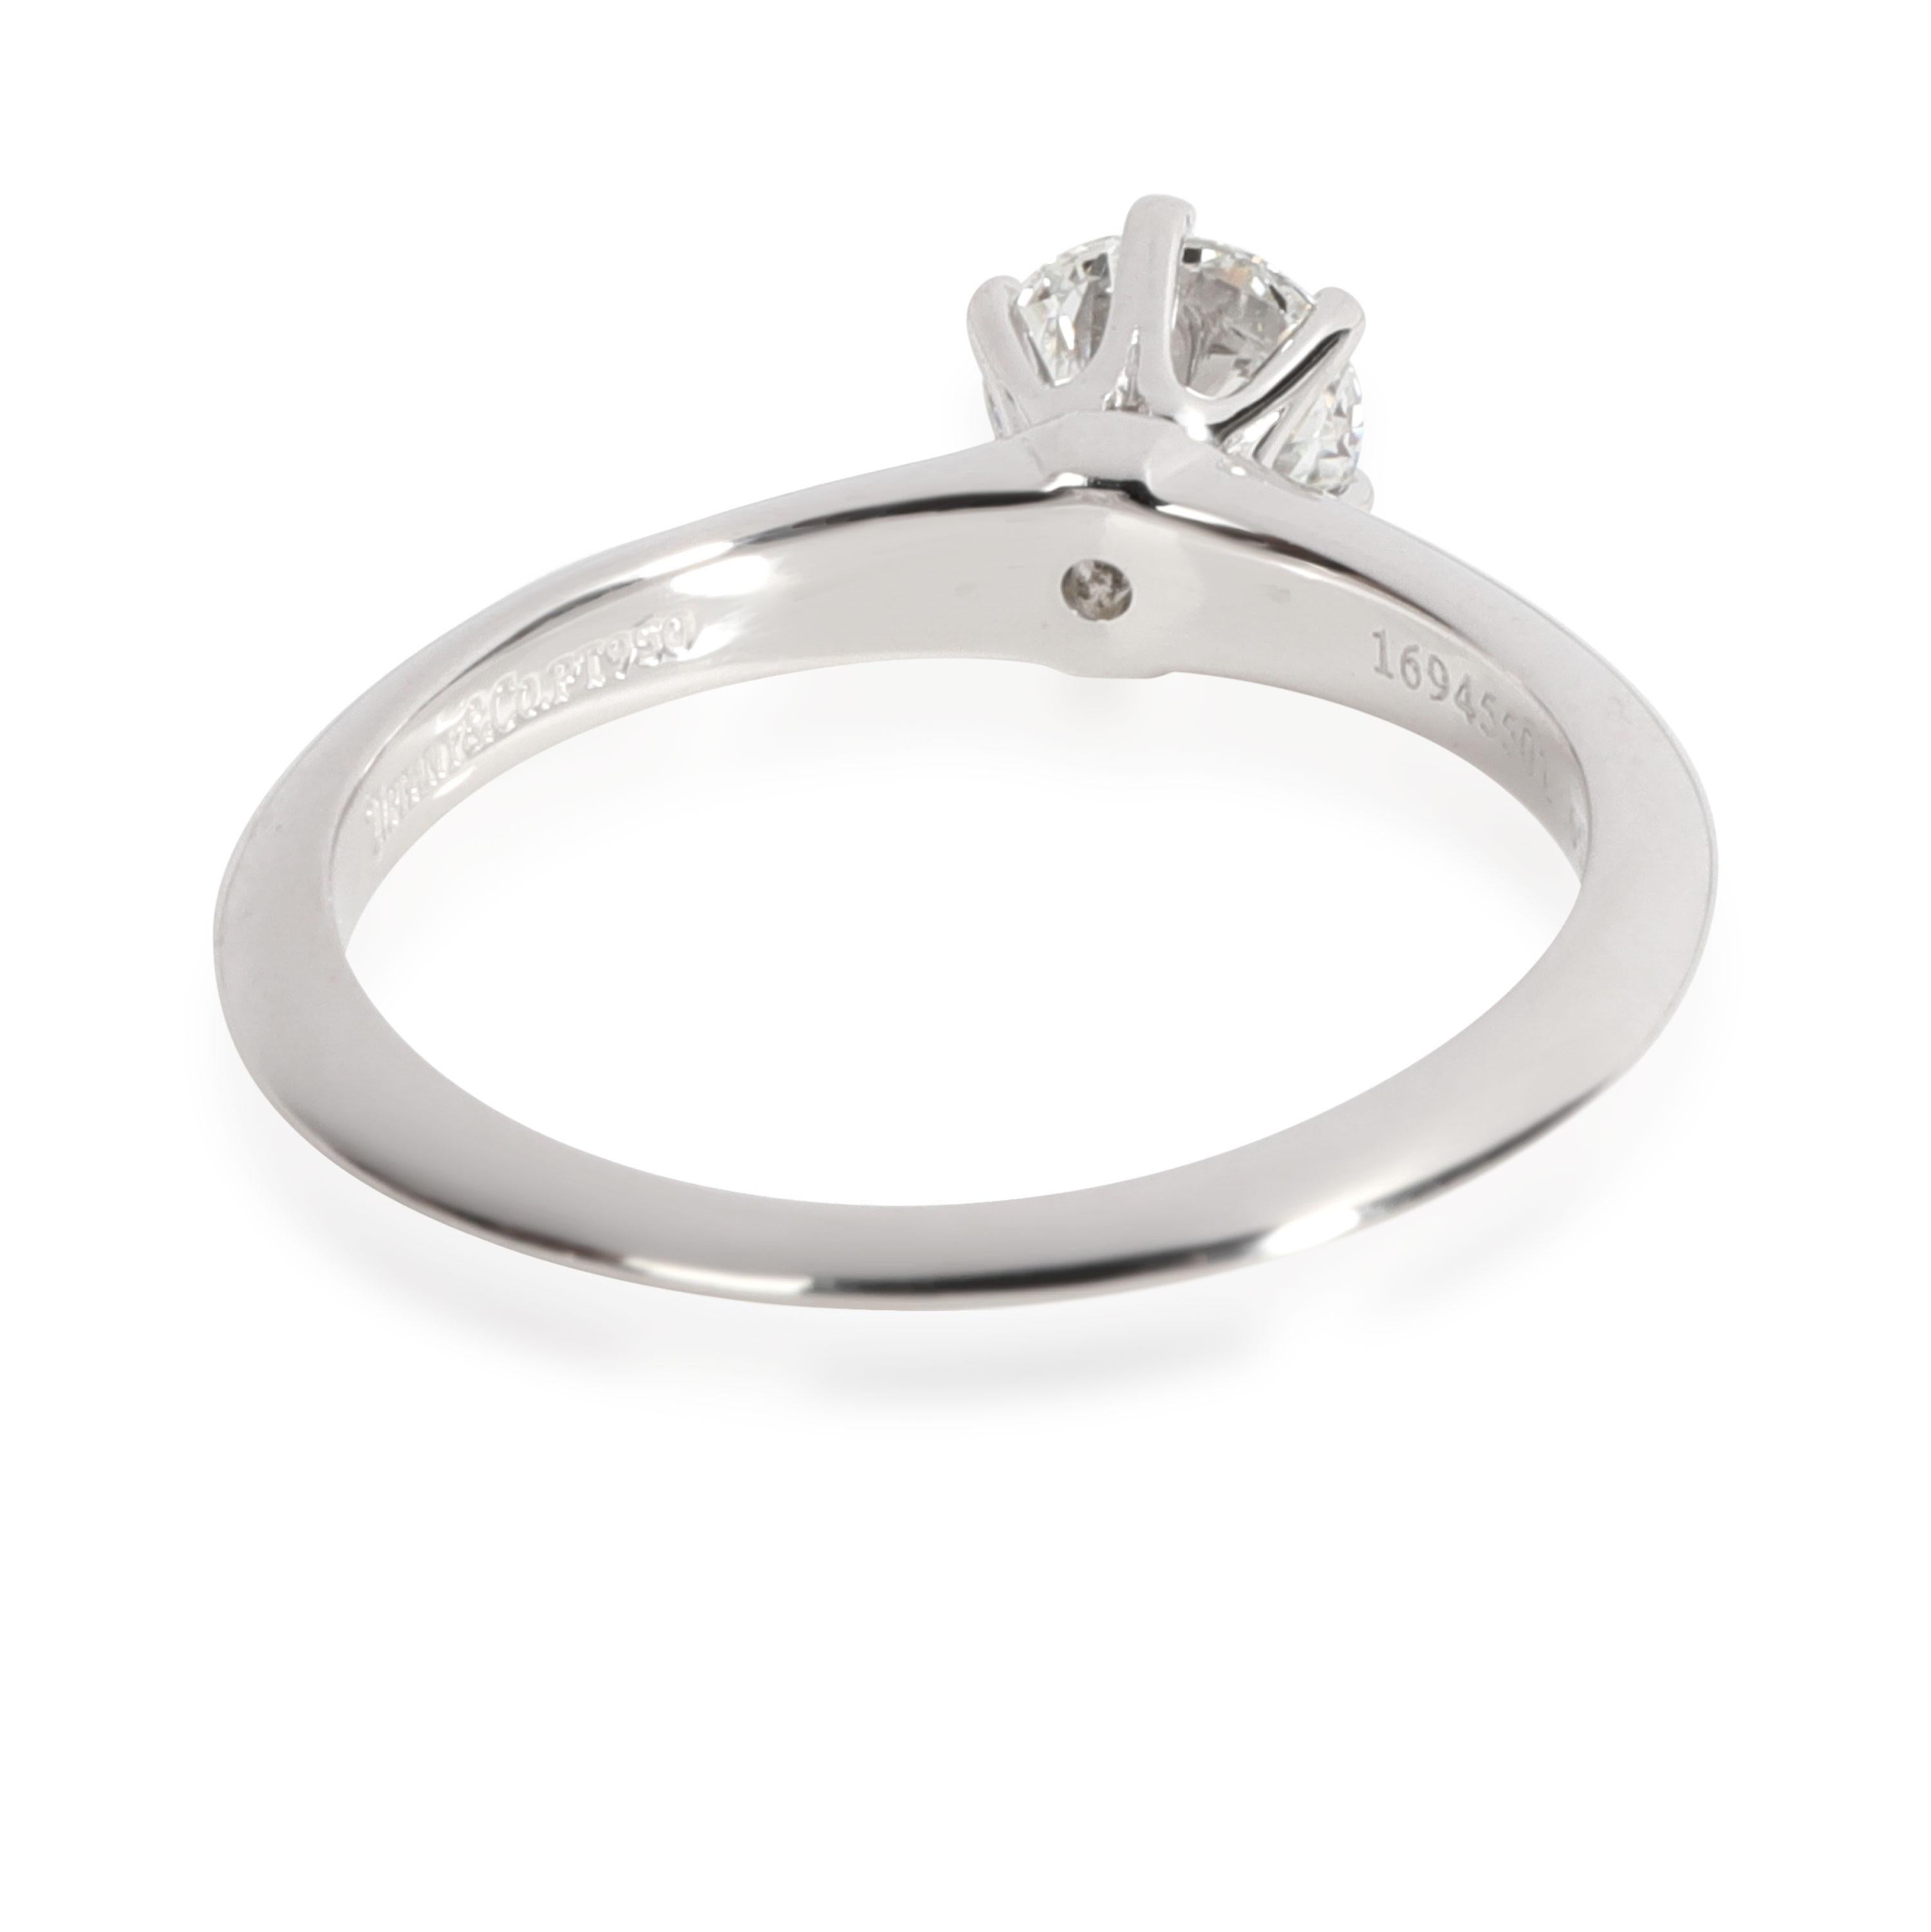 Tiffany & Co. Solitaire Diamond Engagement Ring in Platinum F VS2 0.65 CTW

PRIMARY DETAILS
SKU: 109616
Listing Title: Tiffany & Co. Solitaire Diamond Engagement Ring in Platinum F VS2 0.65 CTW
Condition Description: Retails for 7,450 USD. In